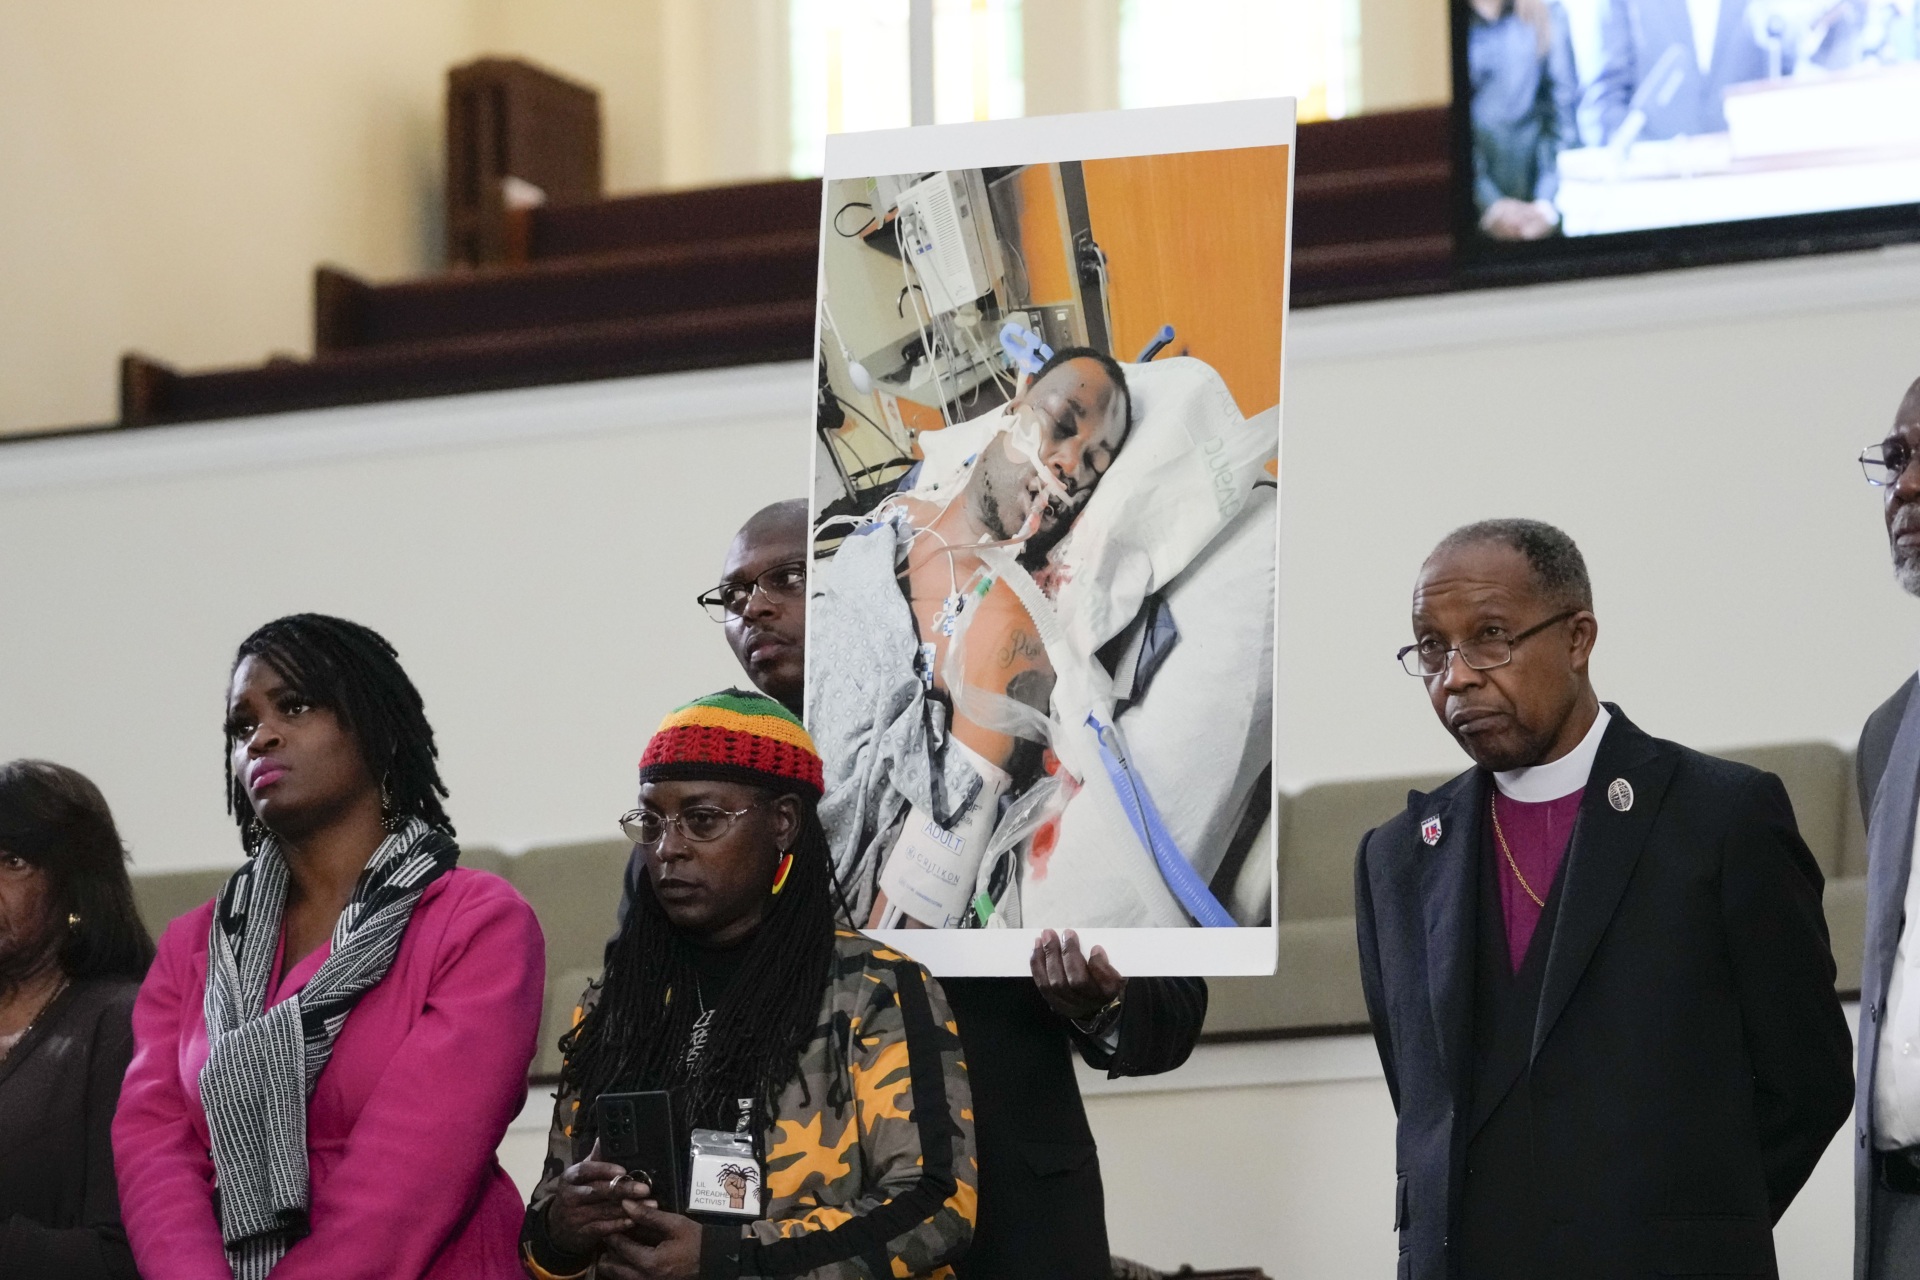 Family members and supporters hold a photograph of Tyre Nichols at a news conference in Memphis, Tenn., Jan. 23, 2023. The U.S. Attorney’s Office said Wednesday, Jan. 25, 2023 the federal investigation into the death of a Black man who died after a violent arrest by Memphis police “may take some time.” Speaking during a news conference, U.S. Attorney Kevin G. Ritz said his office is working with the Justice Department's Civil Rights Division in Washington as it investigates the case of Tyre Nichols, who died three days after his Jan. 7 arrest. (AP Photo/Gerald Herbert, file)